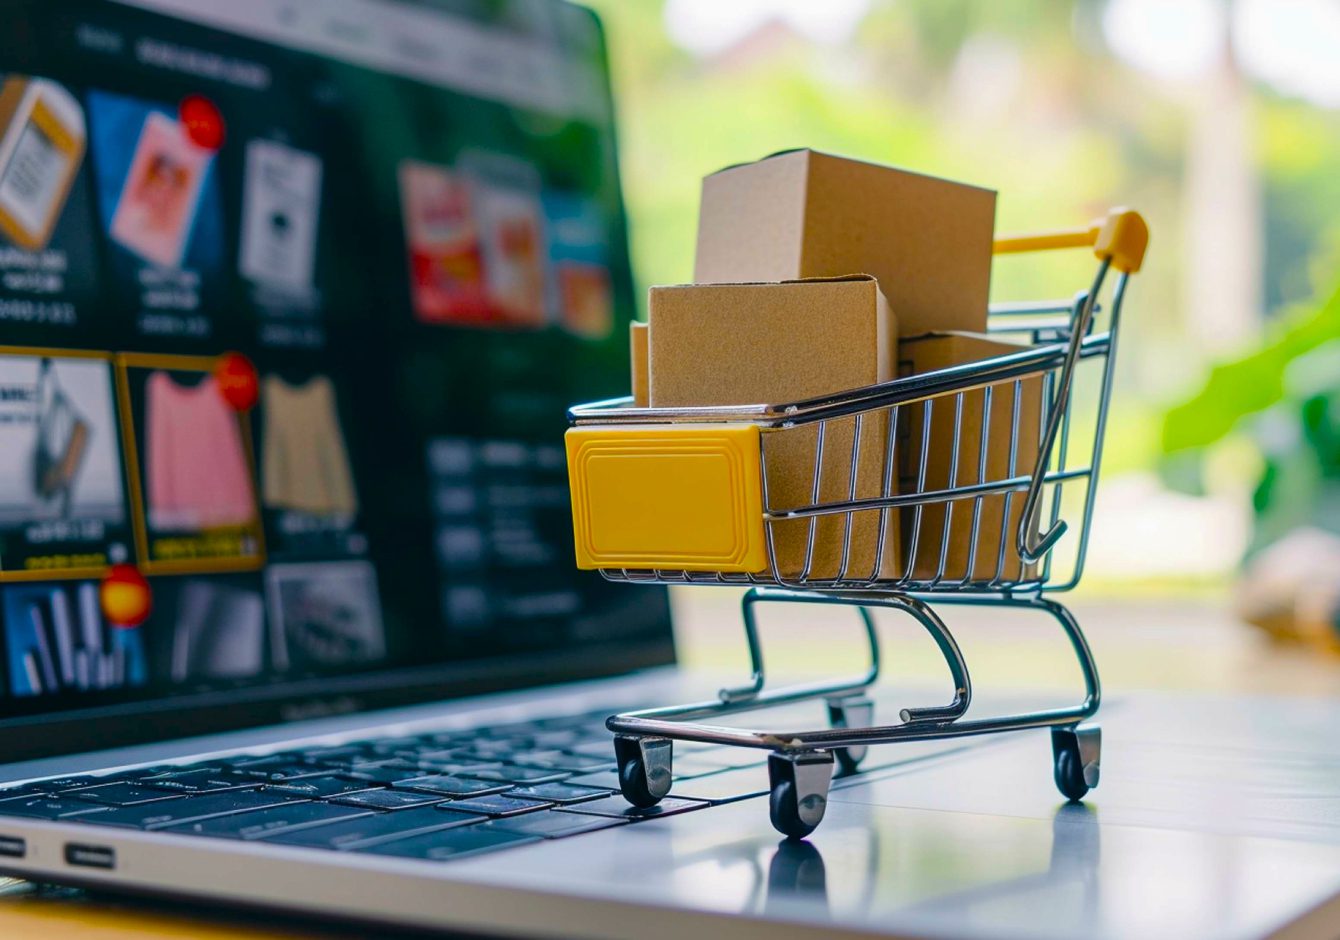 Miniature shopping cart full of boxes sitting on laptop with eCommerce store on screen